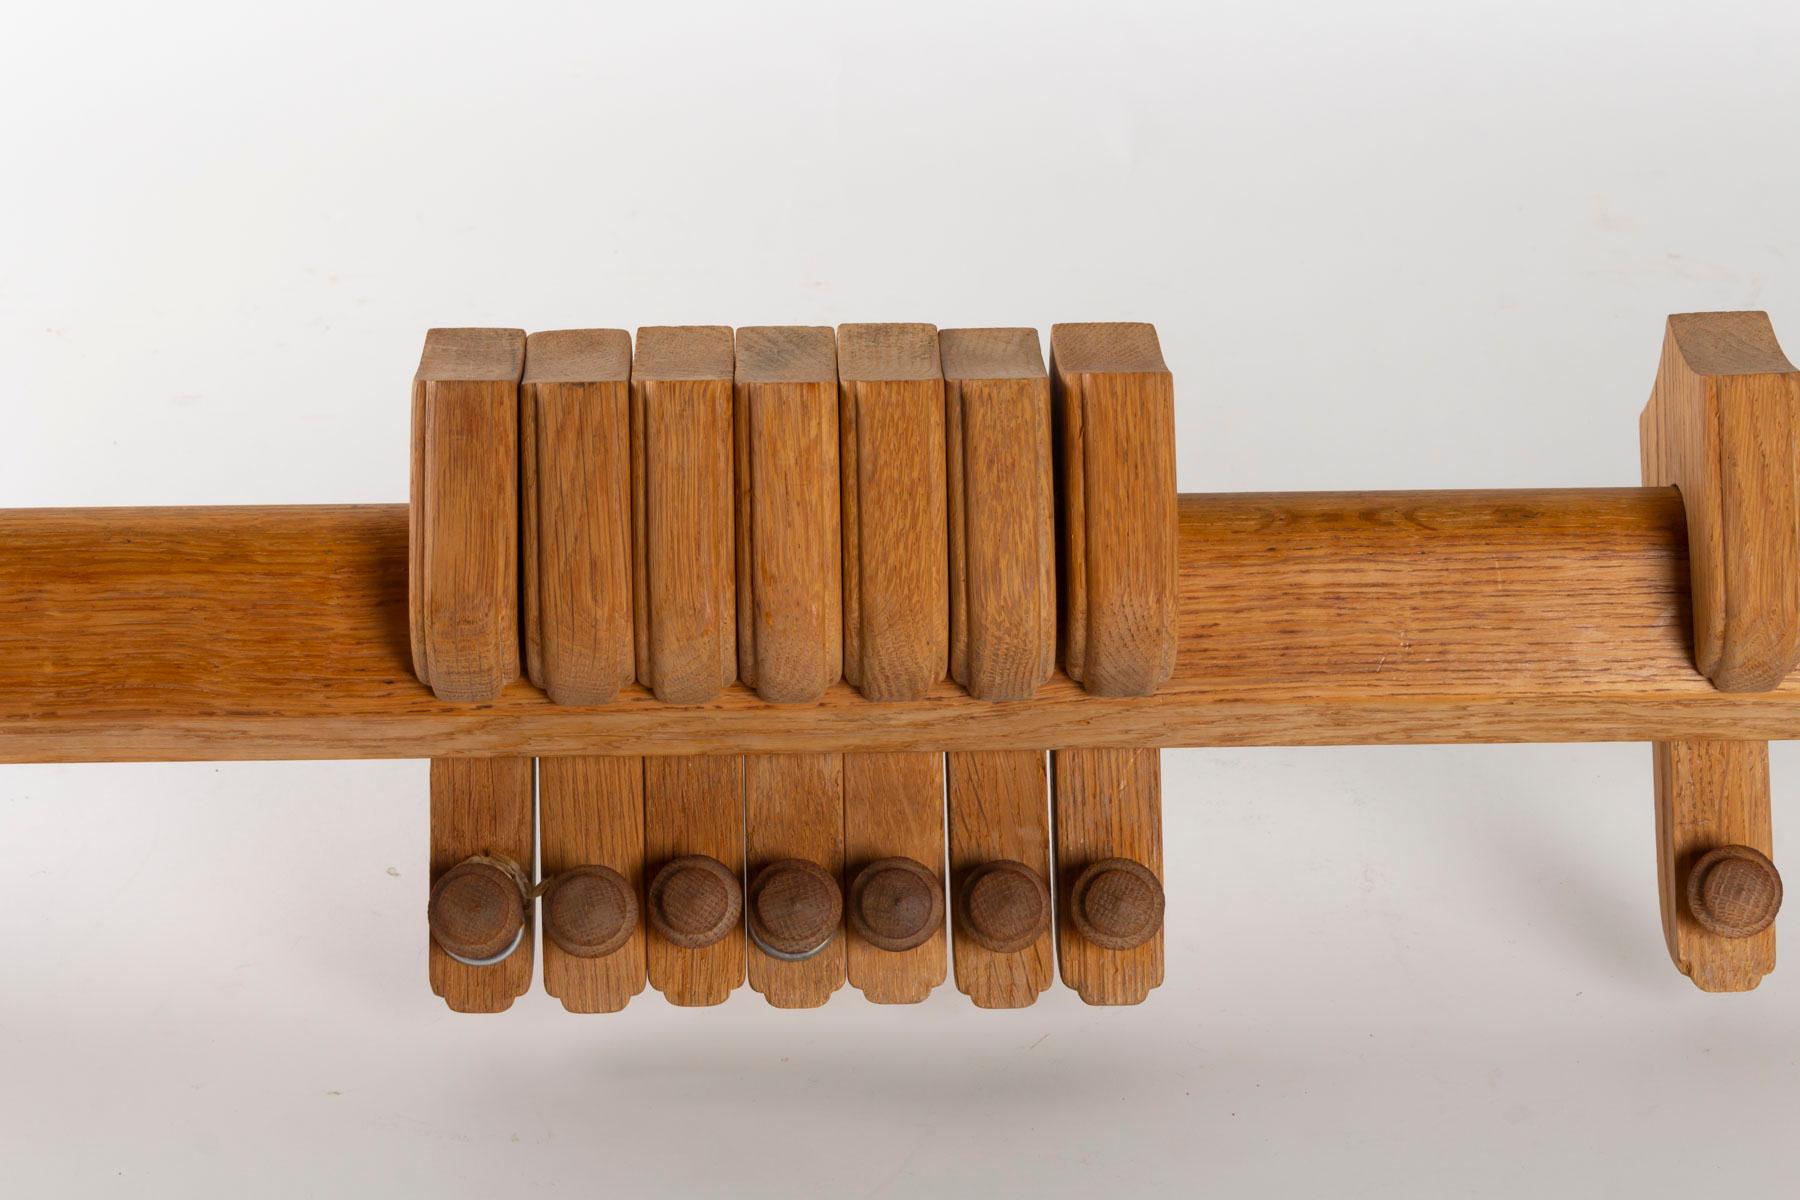 Curtain rod by Guillerme and Chambron, 1960
Measures: W 115cm, D 16cm, H 24cm.